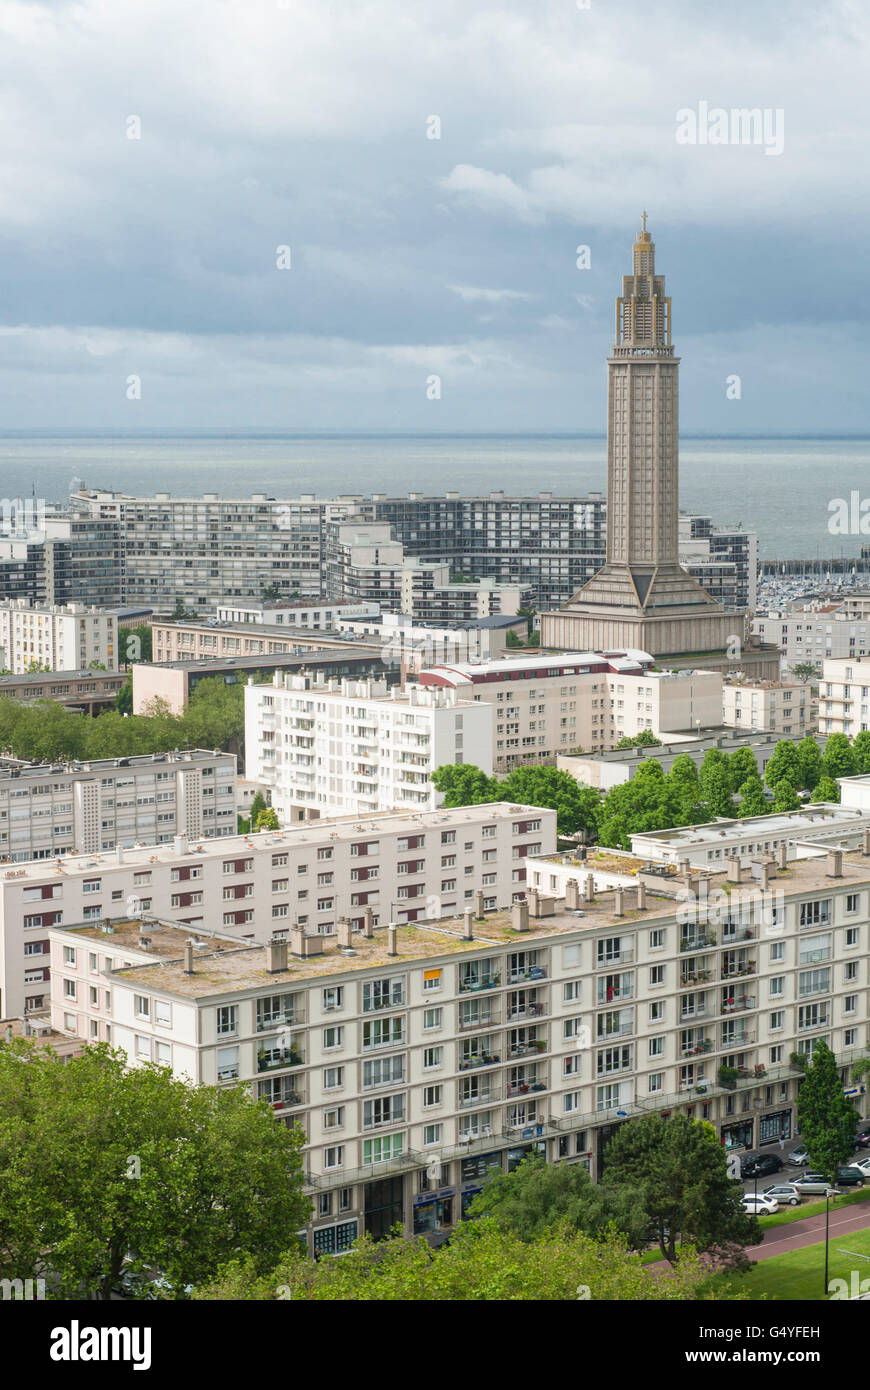 The world-heritage area of Le Havre, built by Auguste Perret with St Joseph's church as landmark, Normandy, France Stock Photo